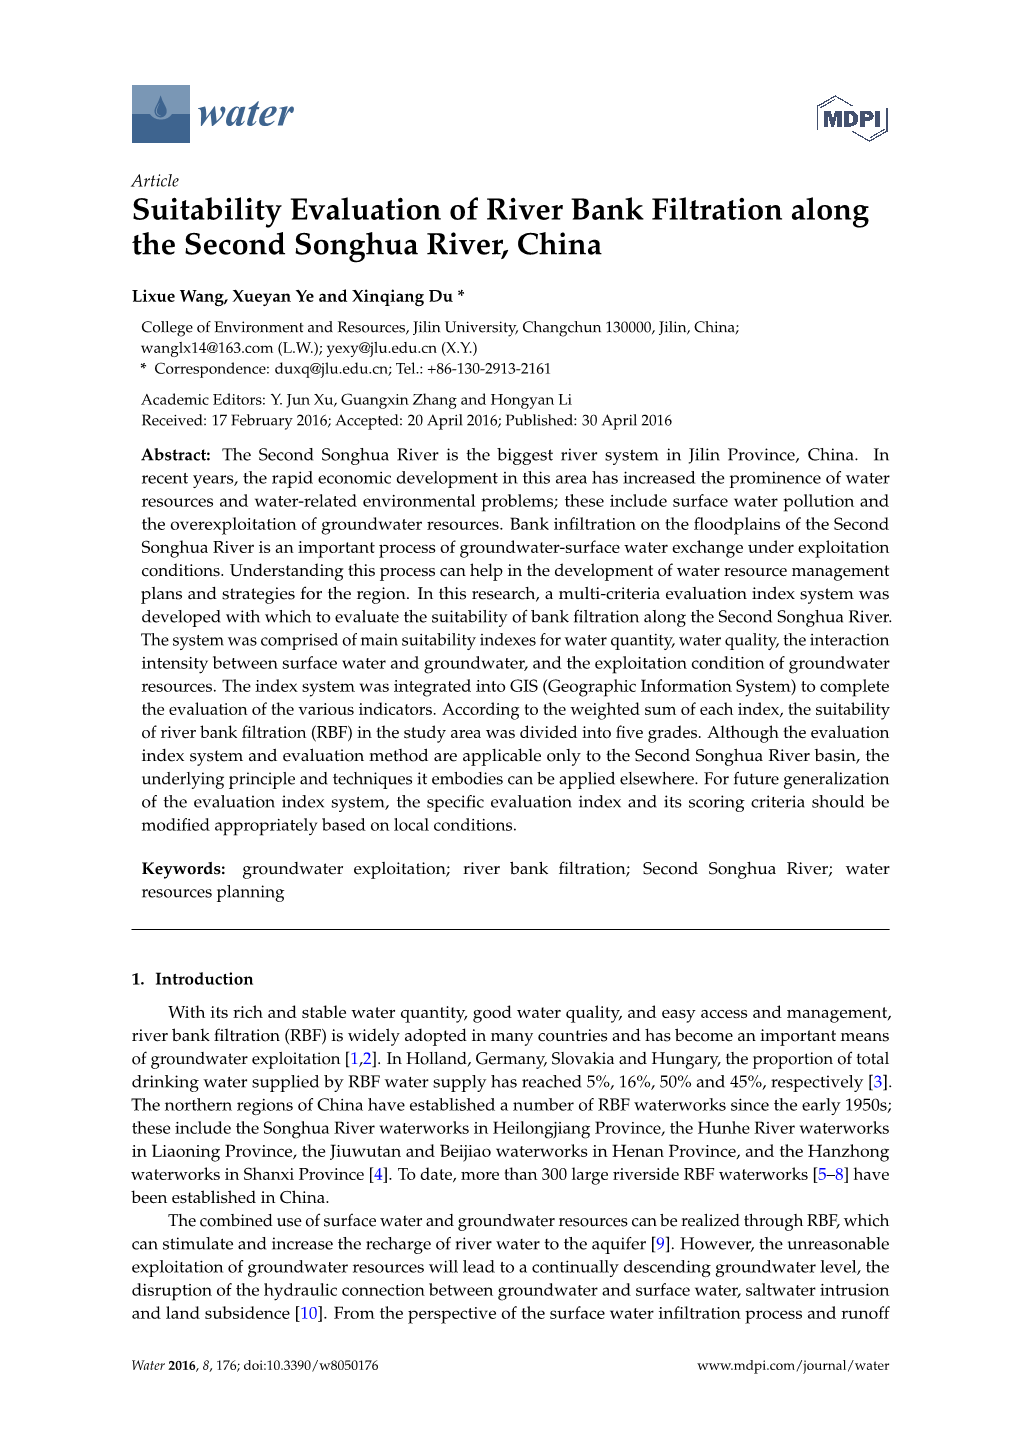 Suitability Evaluation of River Bank Filtration Along the Second Songhua River, China